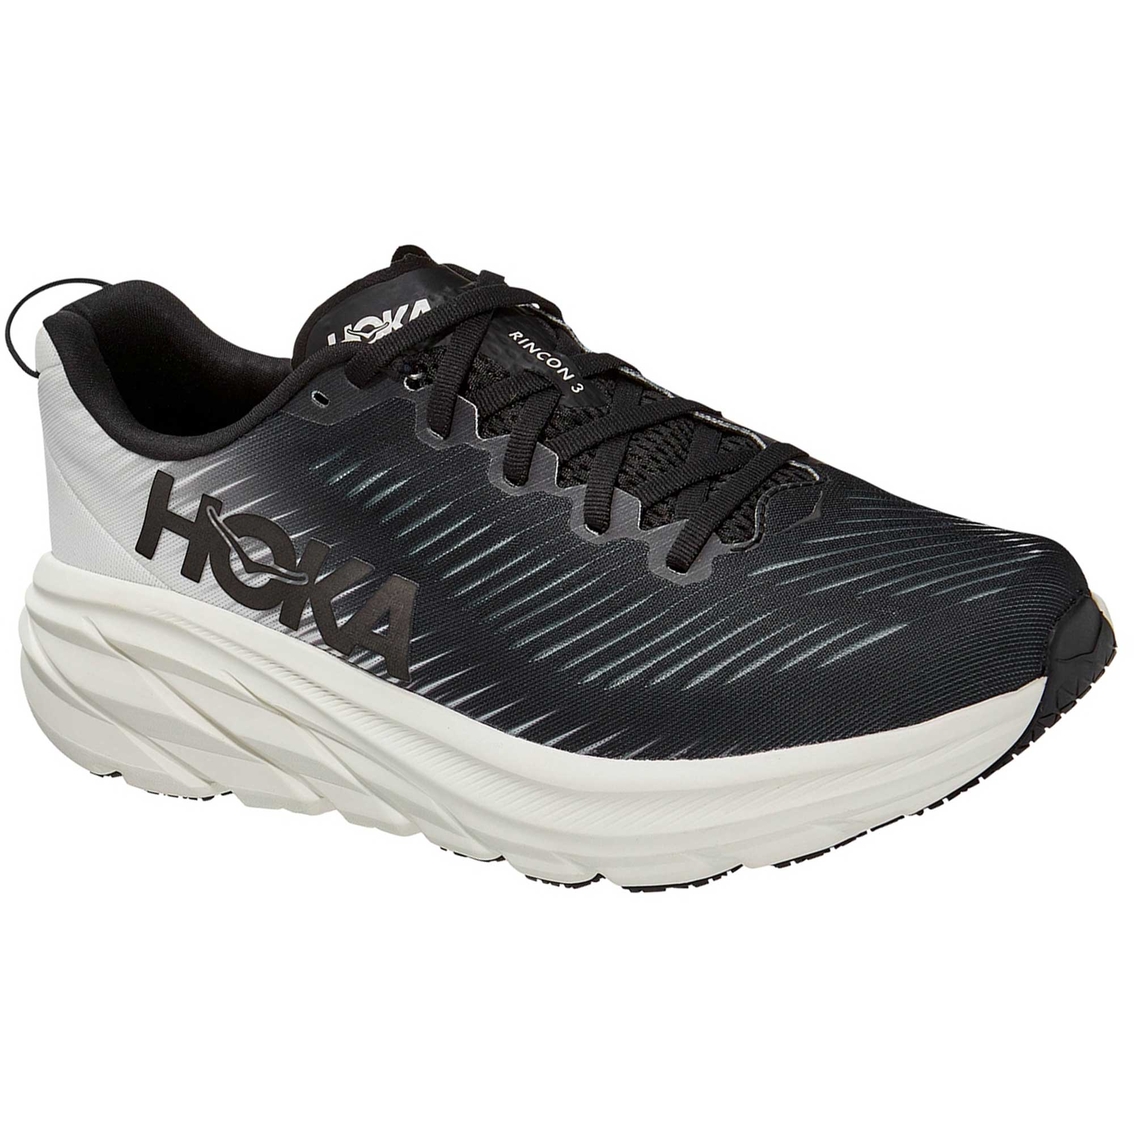 Hoka One One Men's Rincon 3 Running Shoes | Running | Shoes | Shop The ...